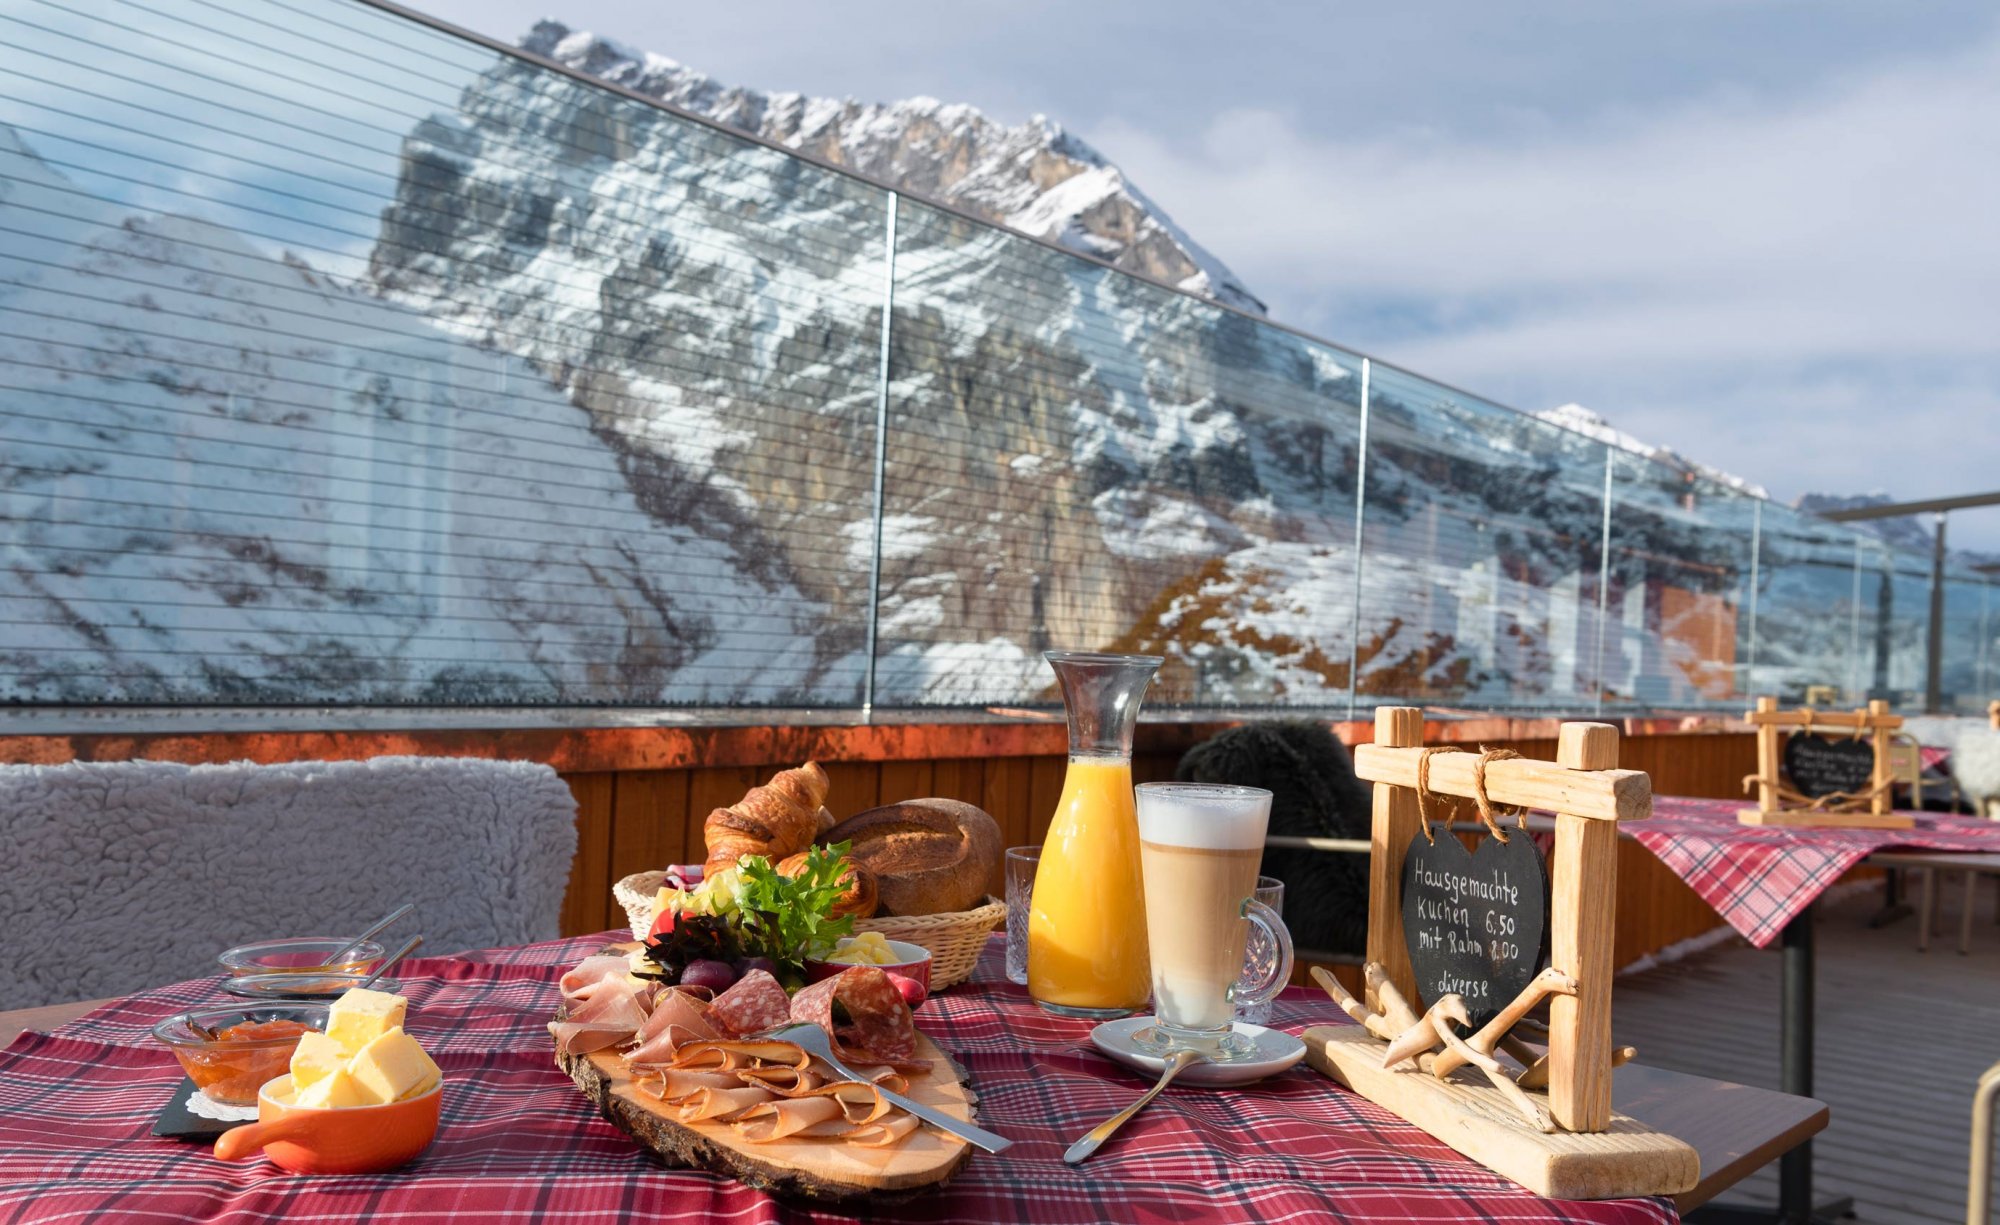 Enjoy the unique mountain world with view of mount Titlis and spoil yourself in the cosy restaurant.